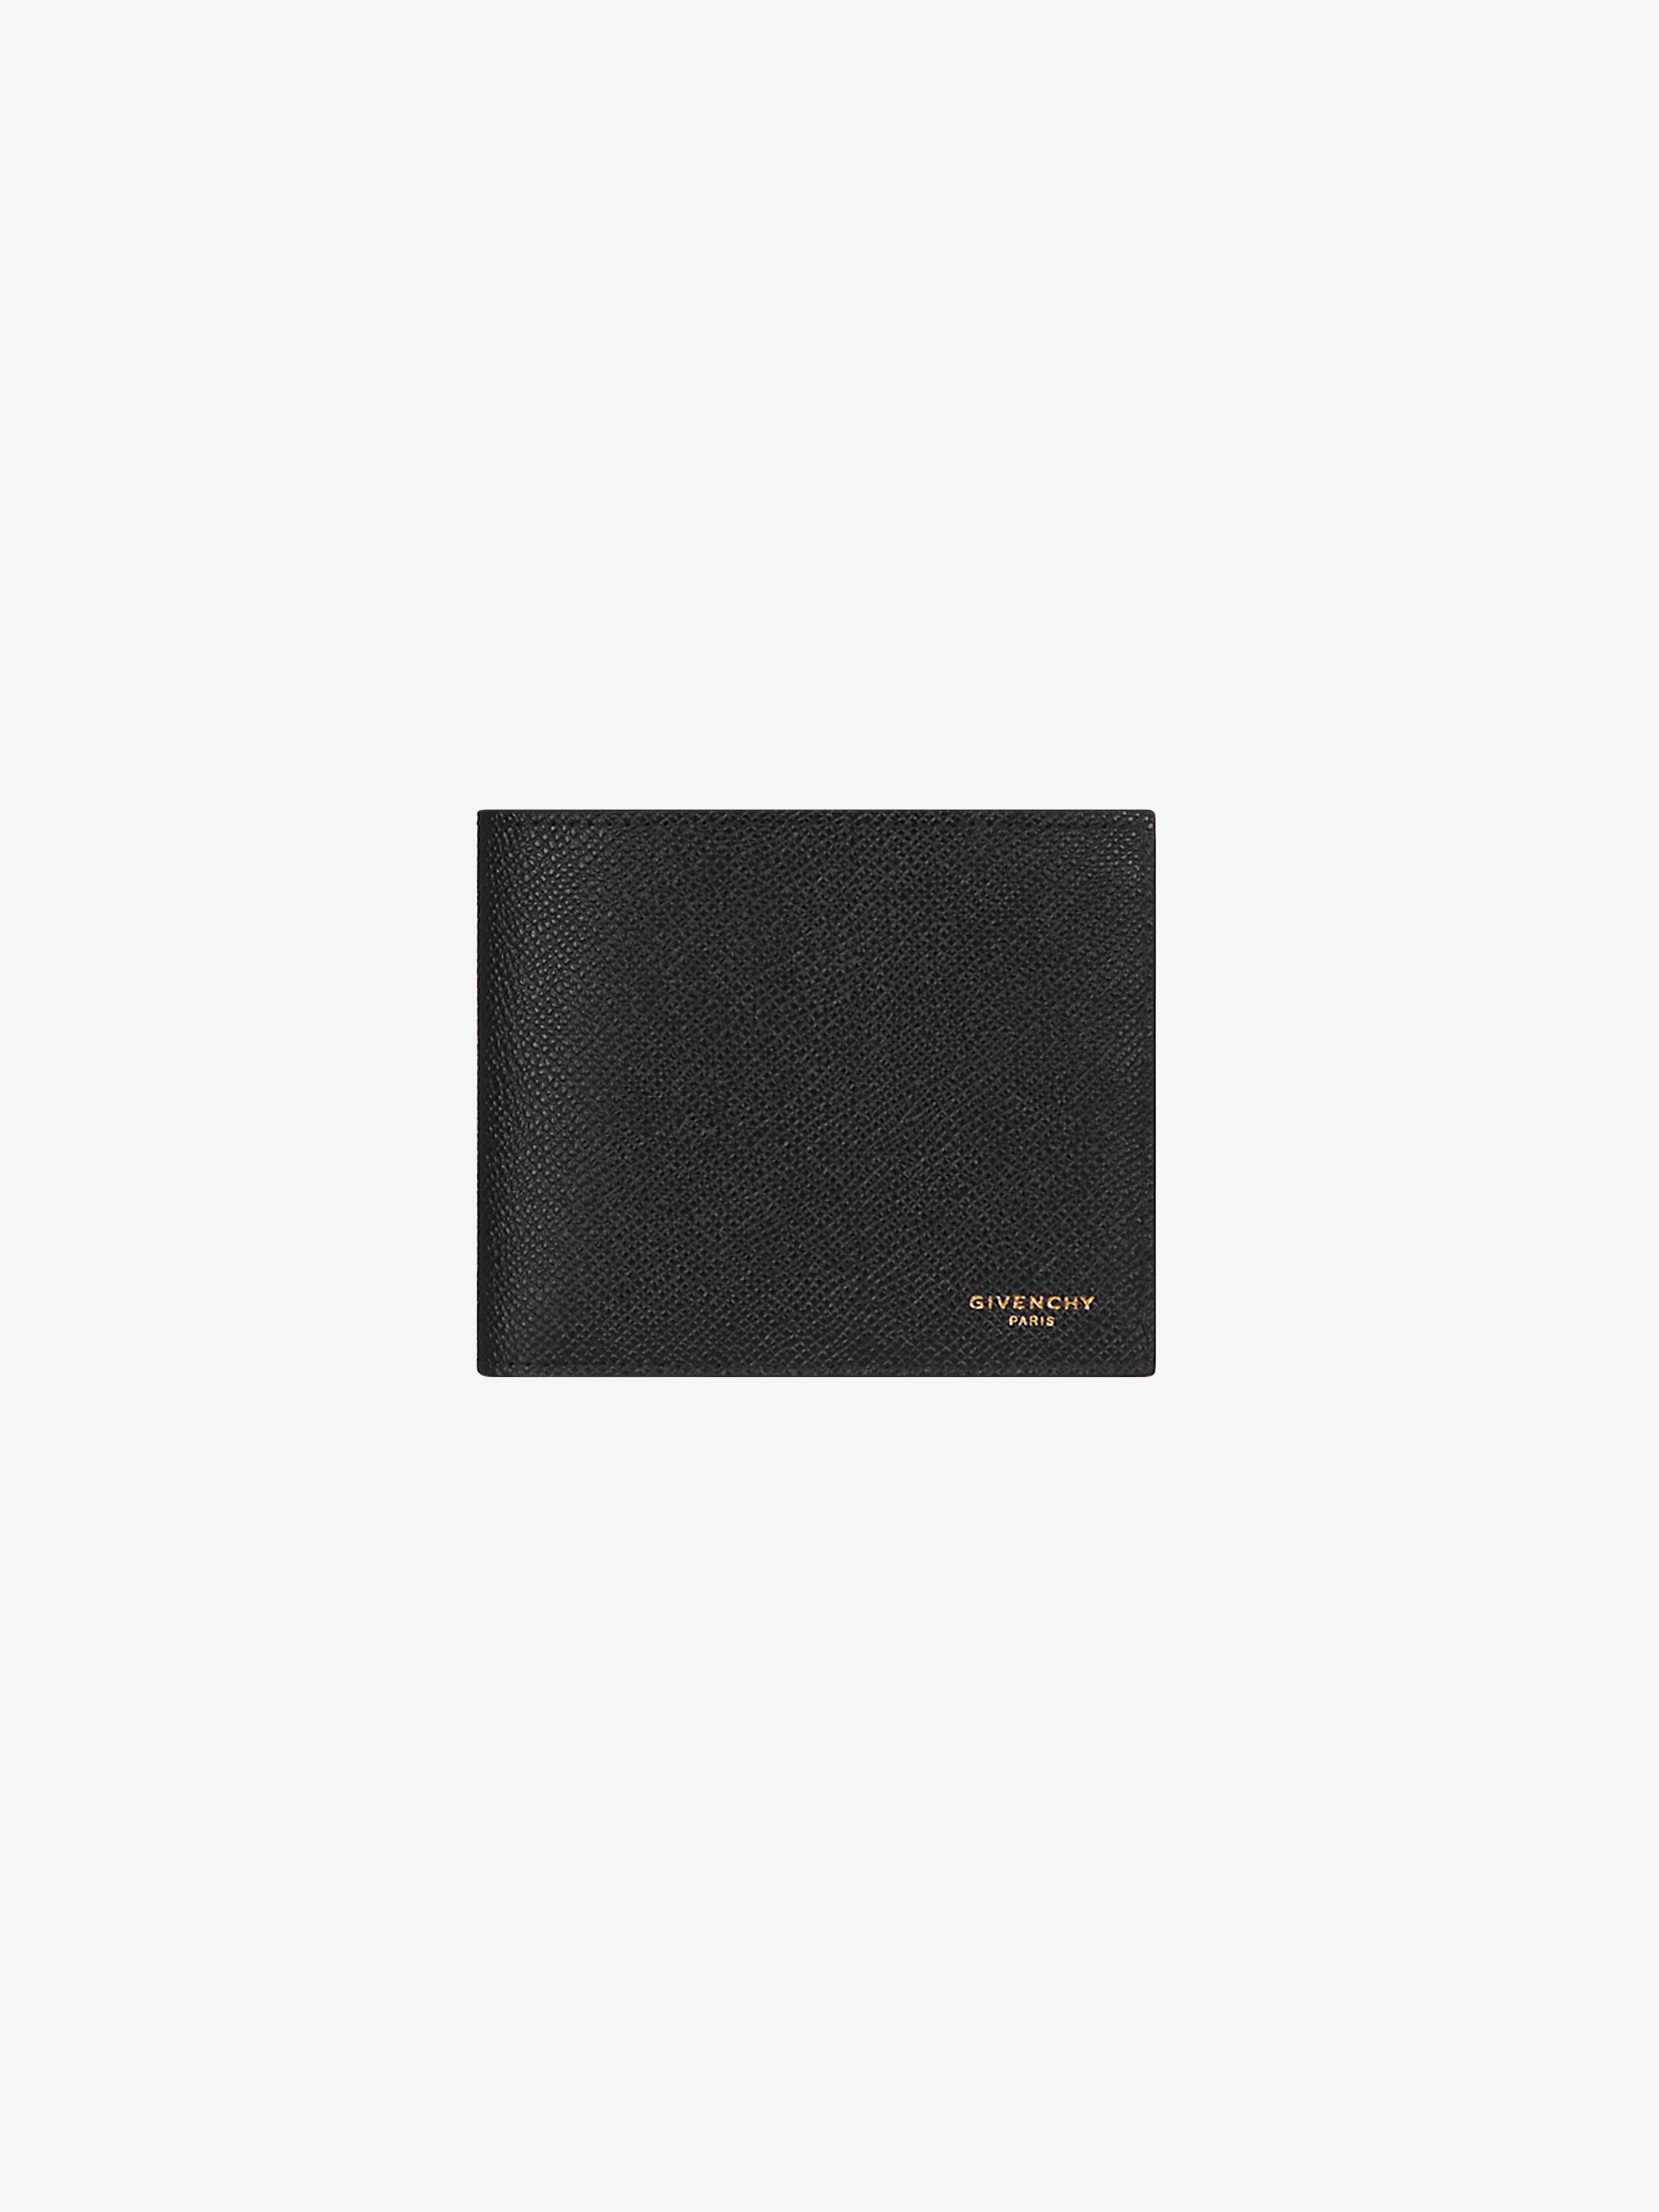 Eros wallet in leather | GIVENCHY Paris